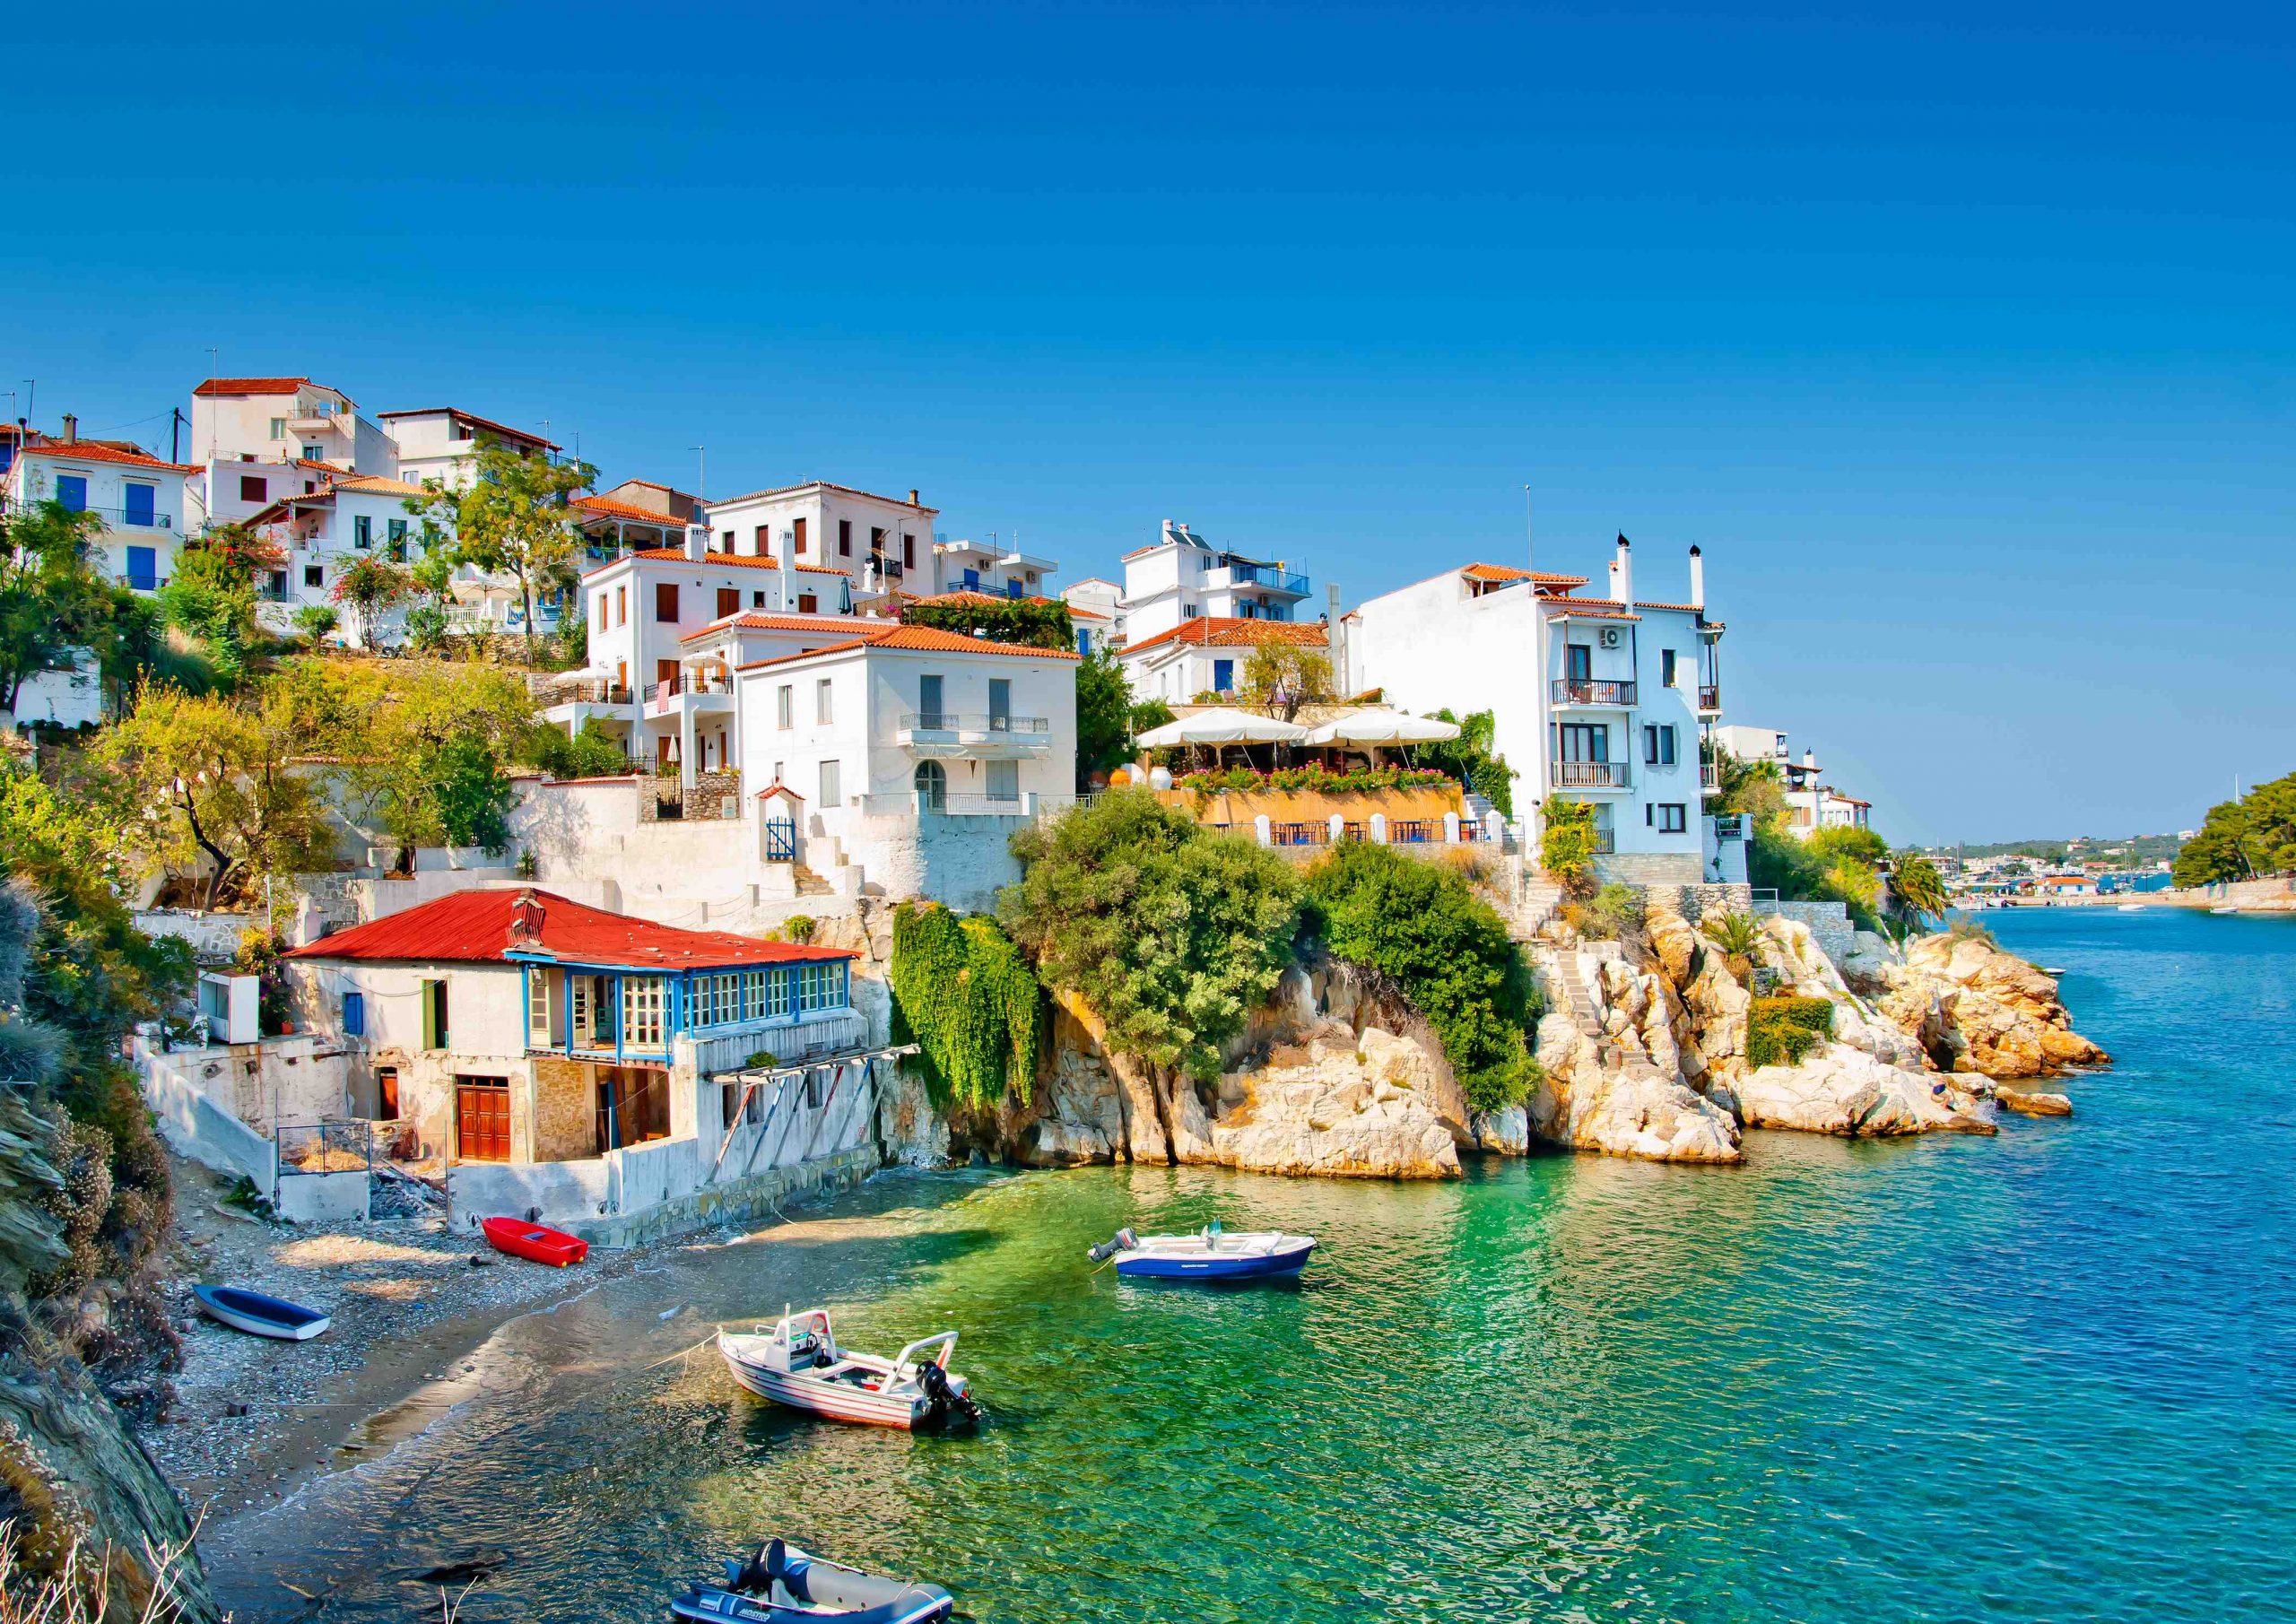 5 ‘Must Visit’ Greek Islands, According to Popular Travel Site (photos)